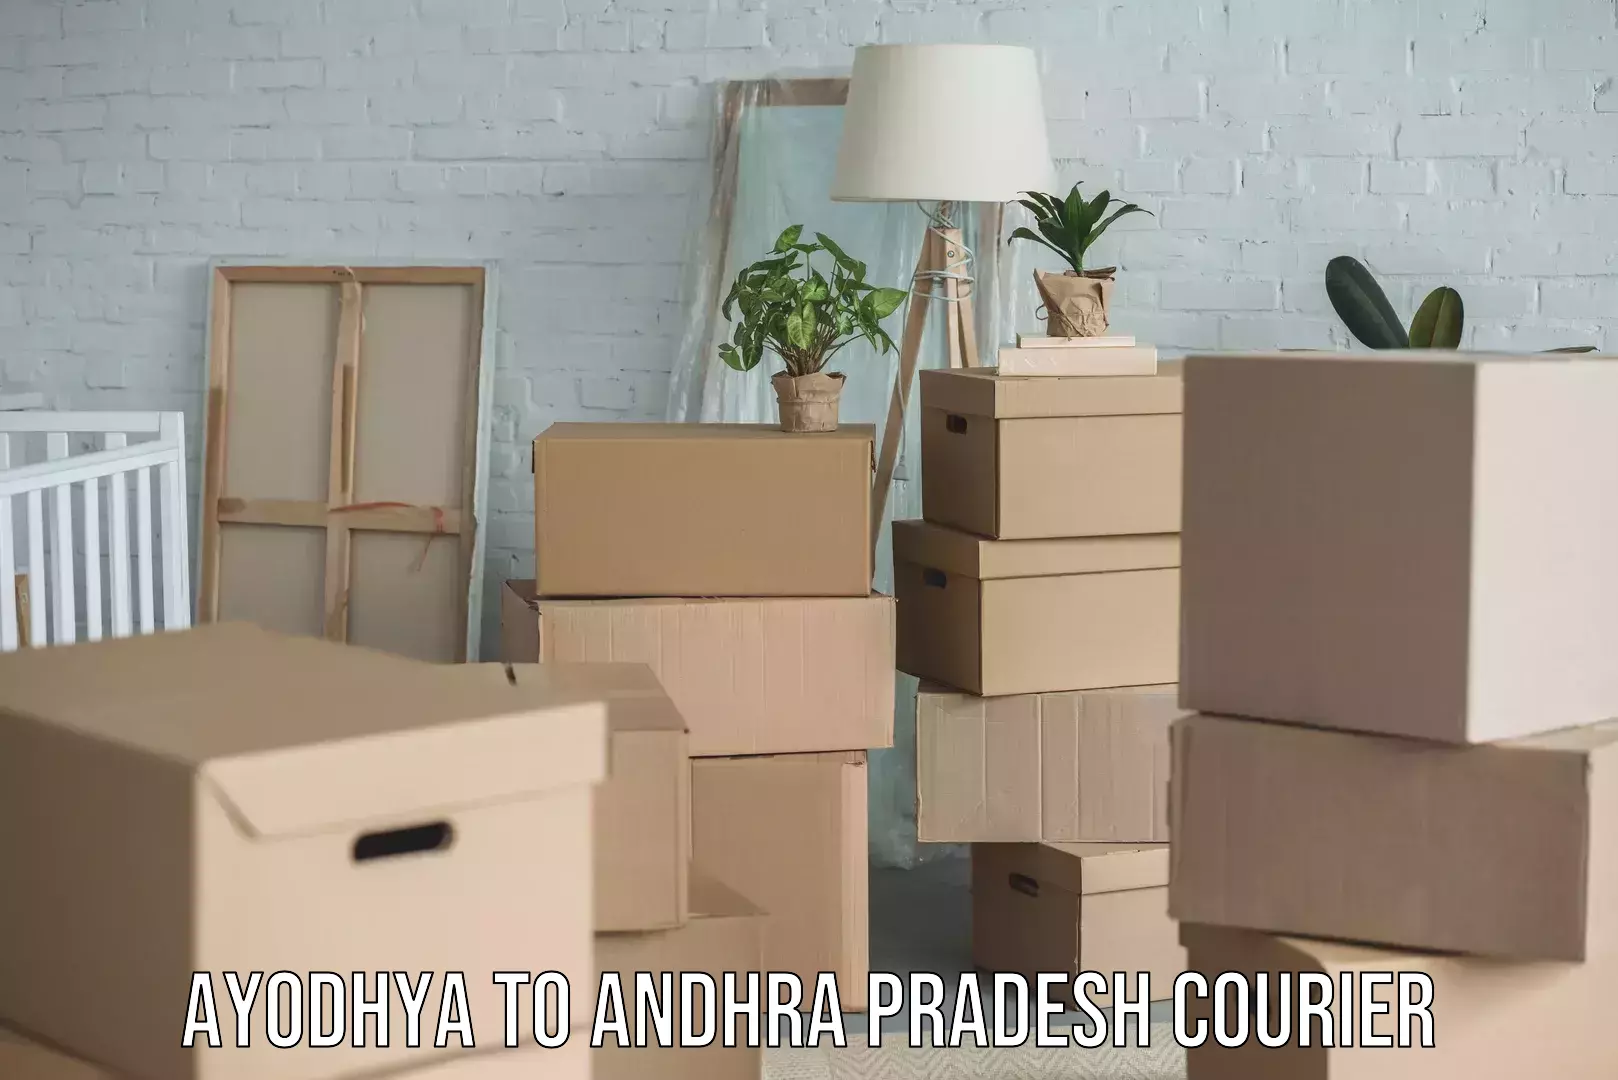 Courier rate comparison in Ayodhya to Andhra Pradesh